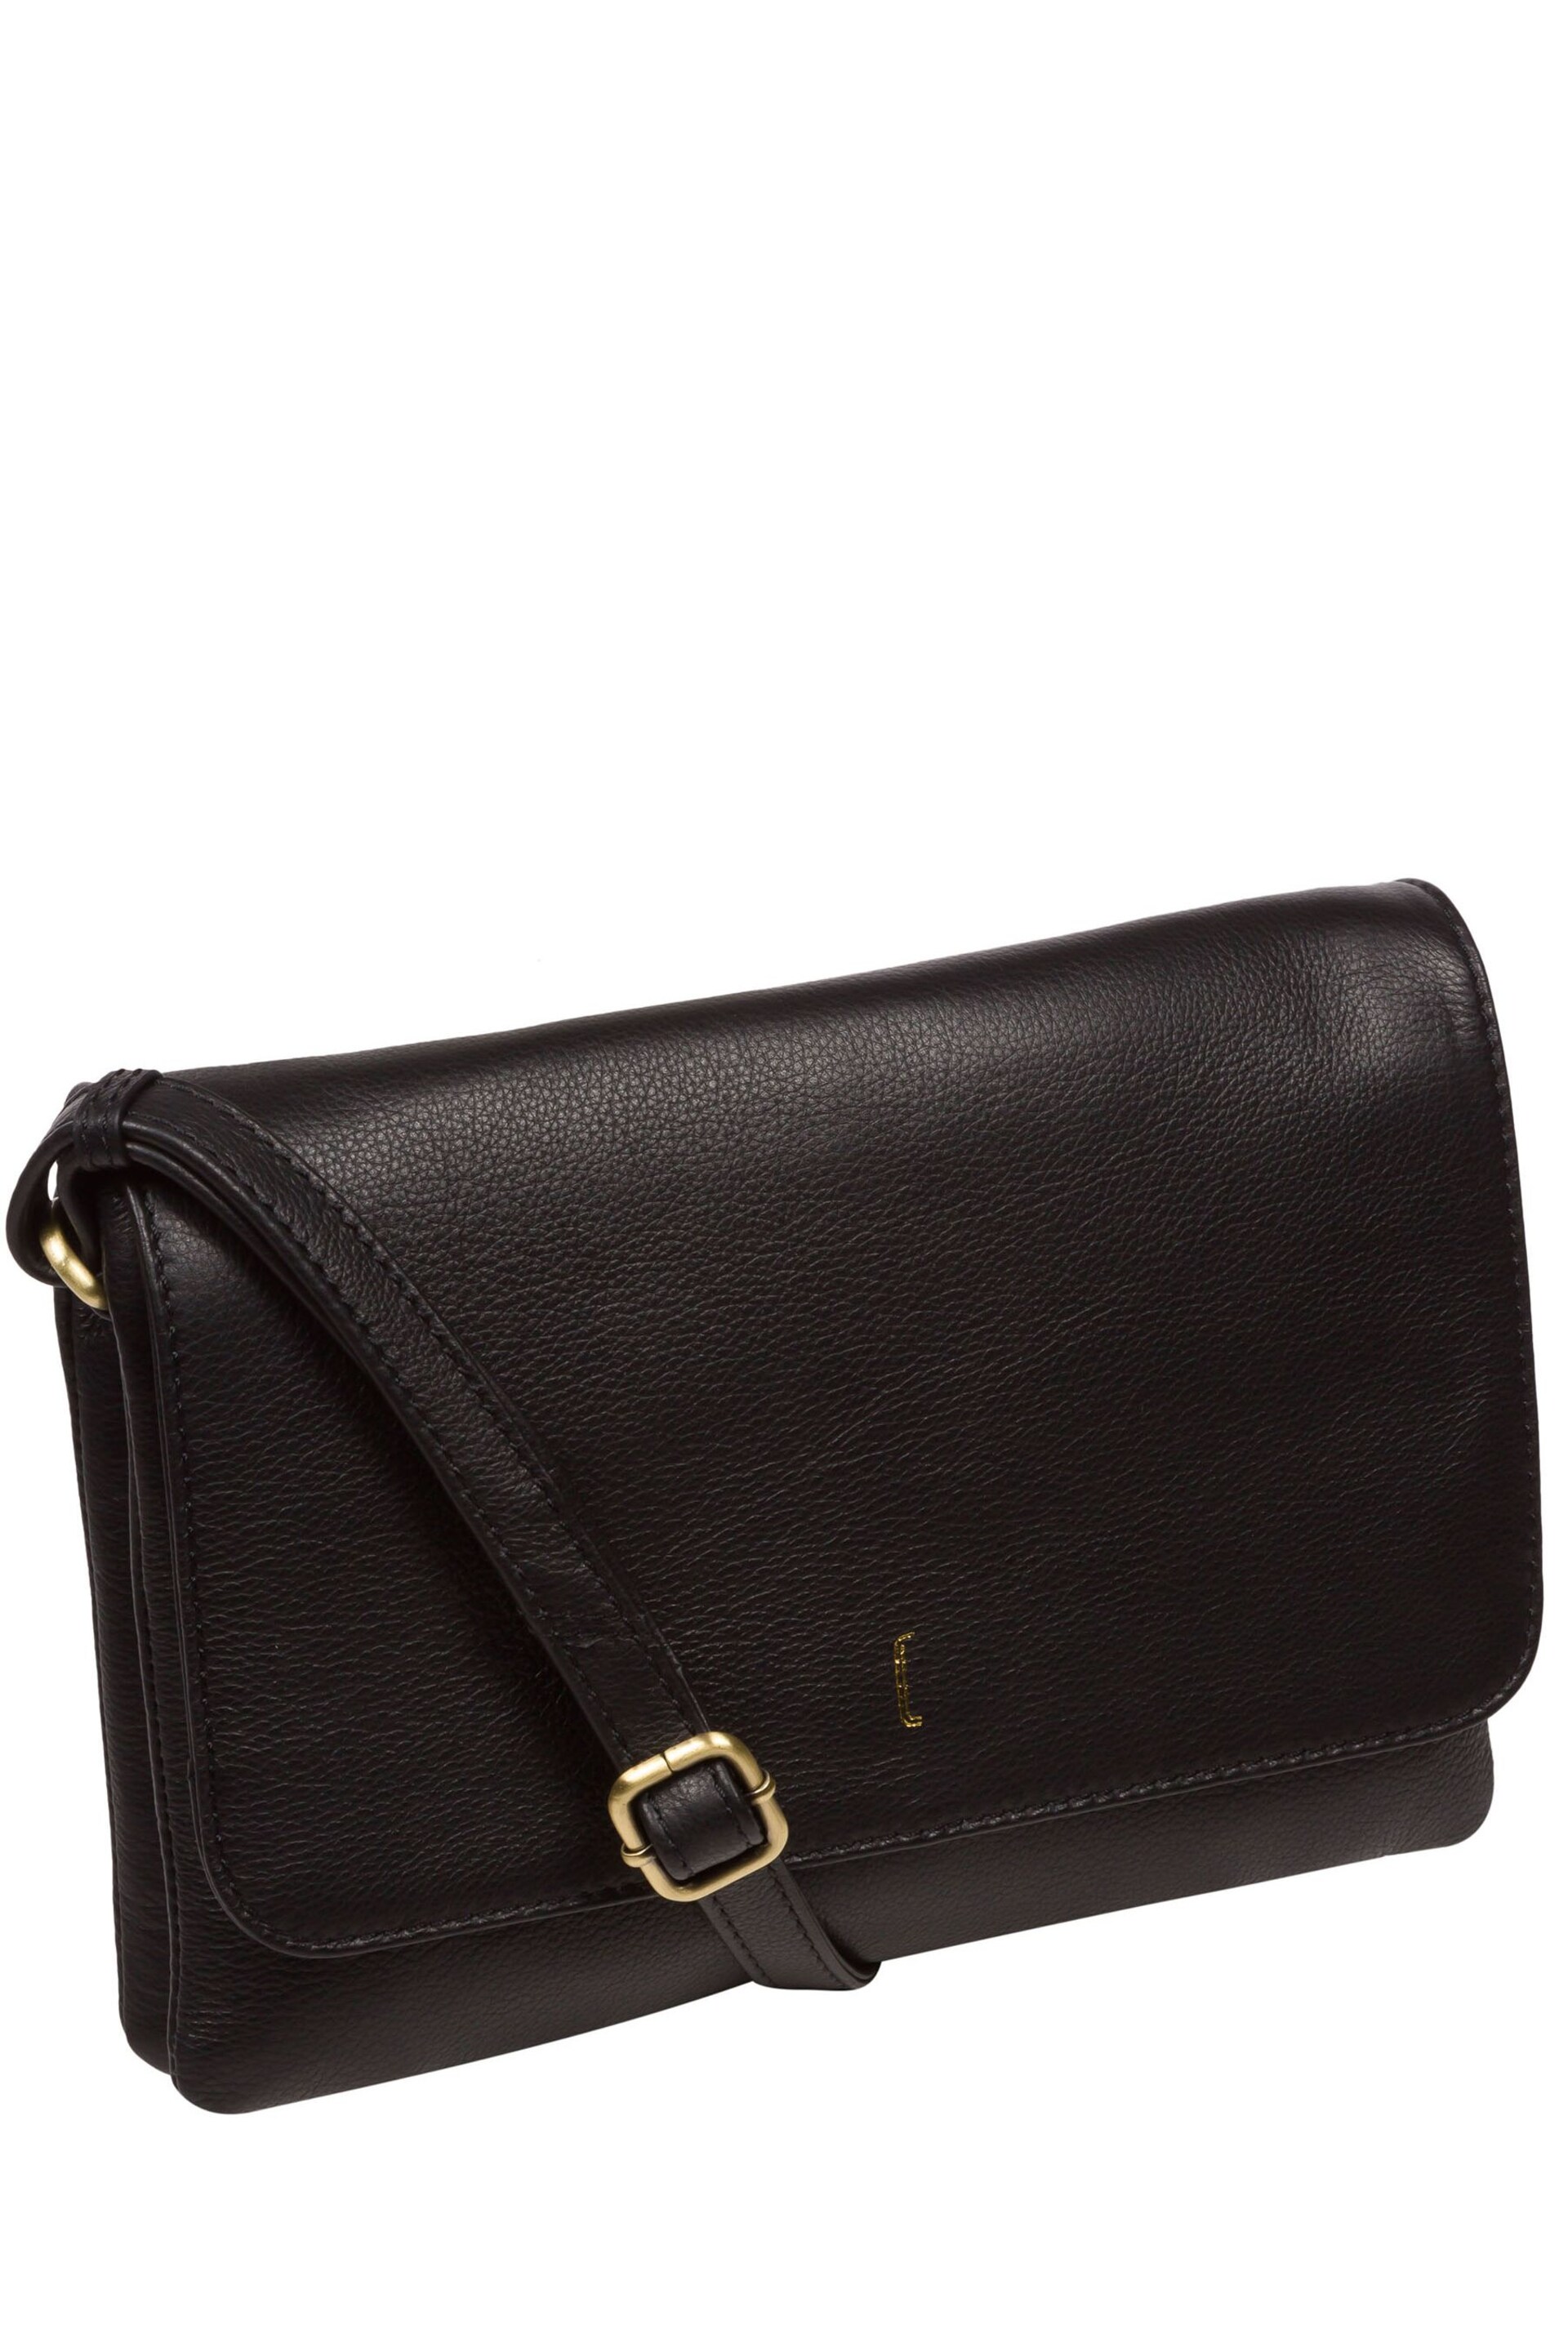 Cultured London Izzy Leather Cross Body Bag - Image 4 of 4